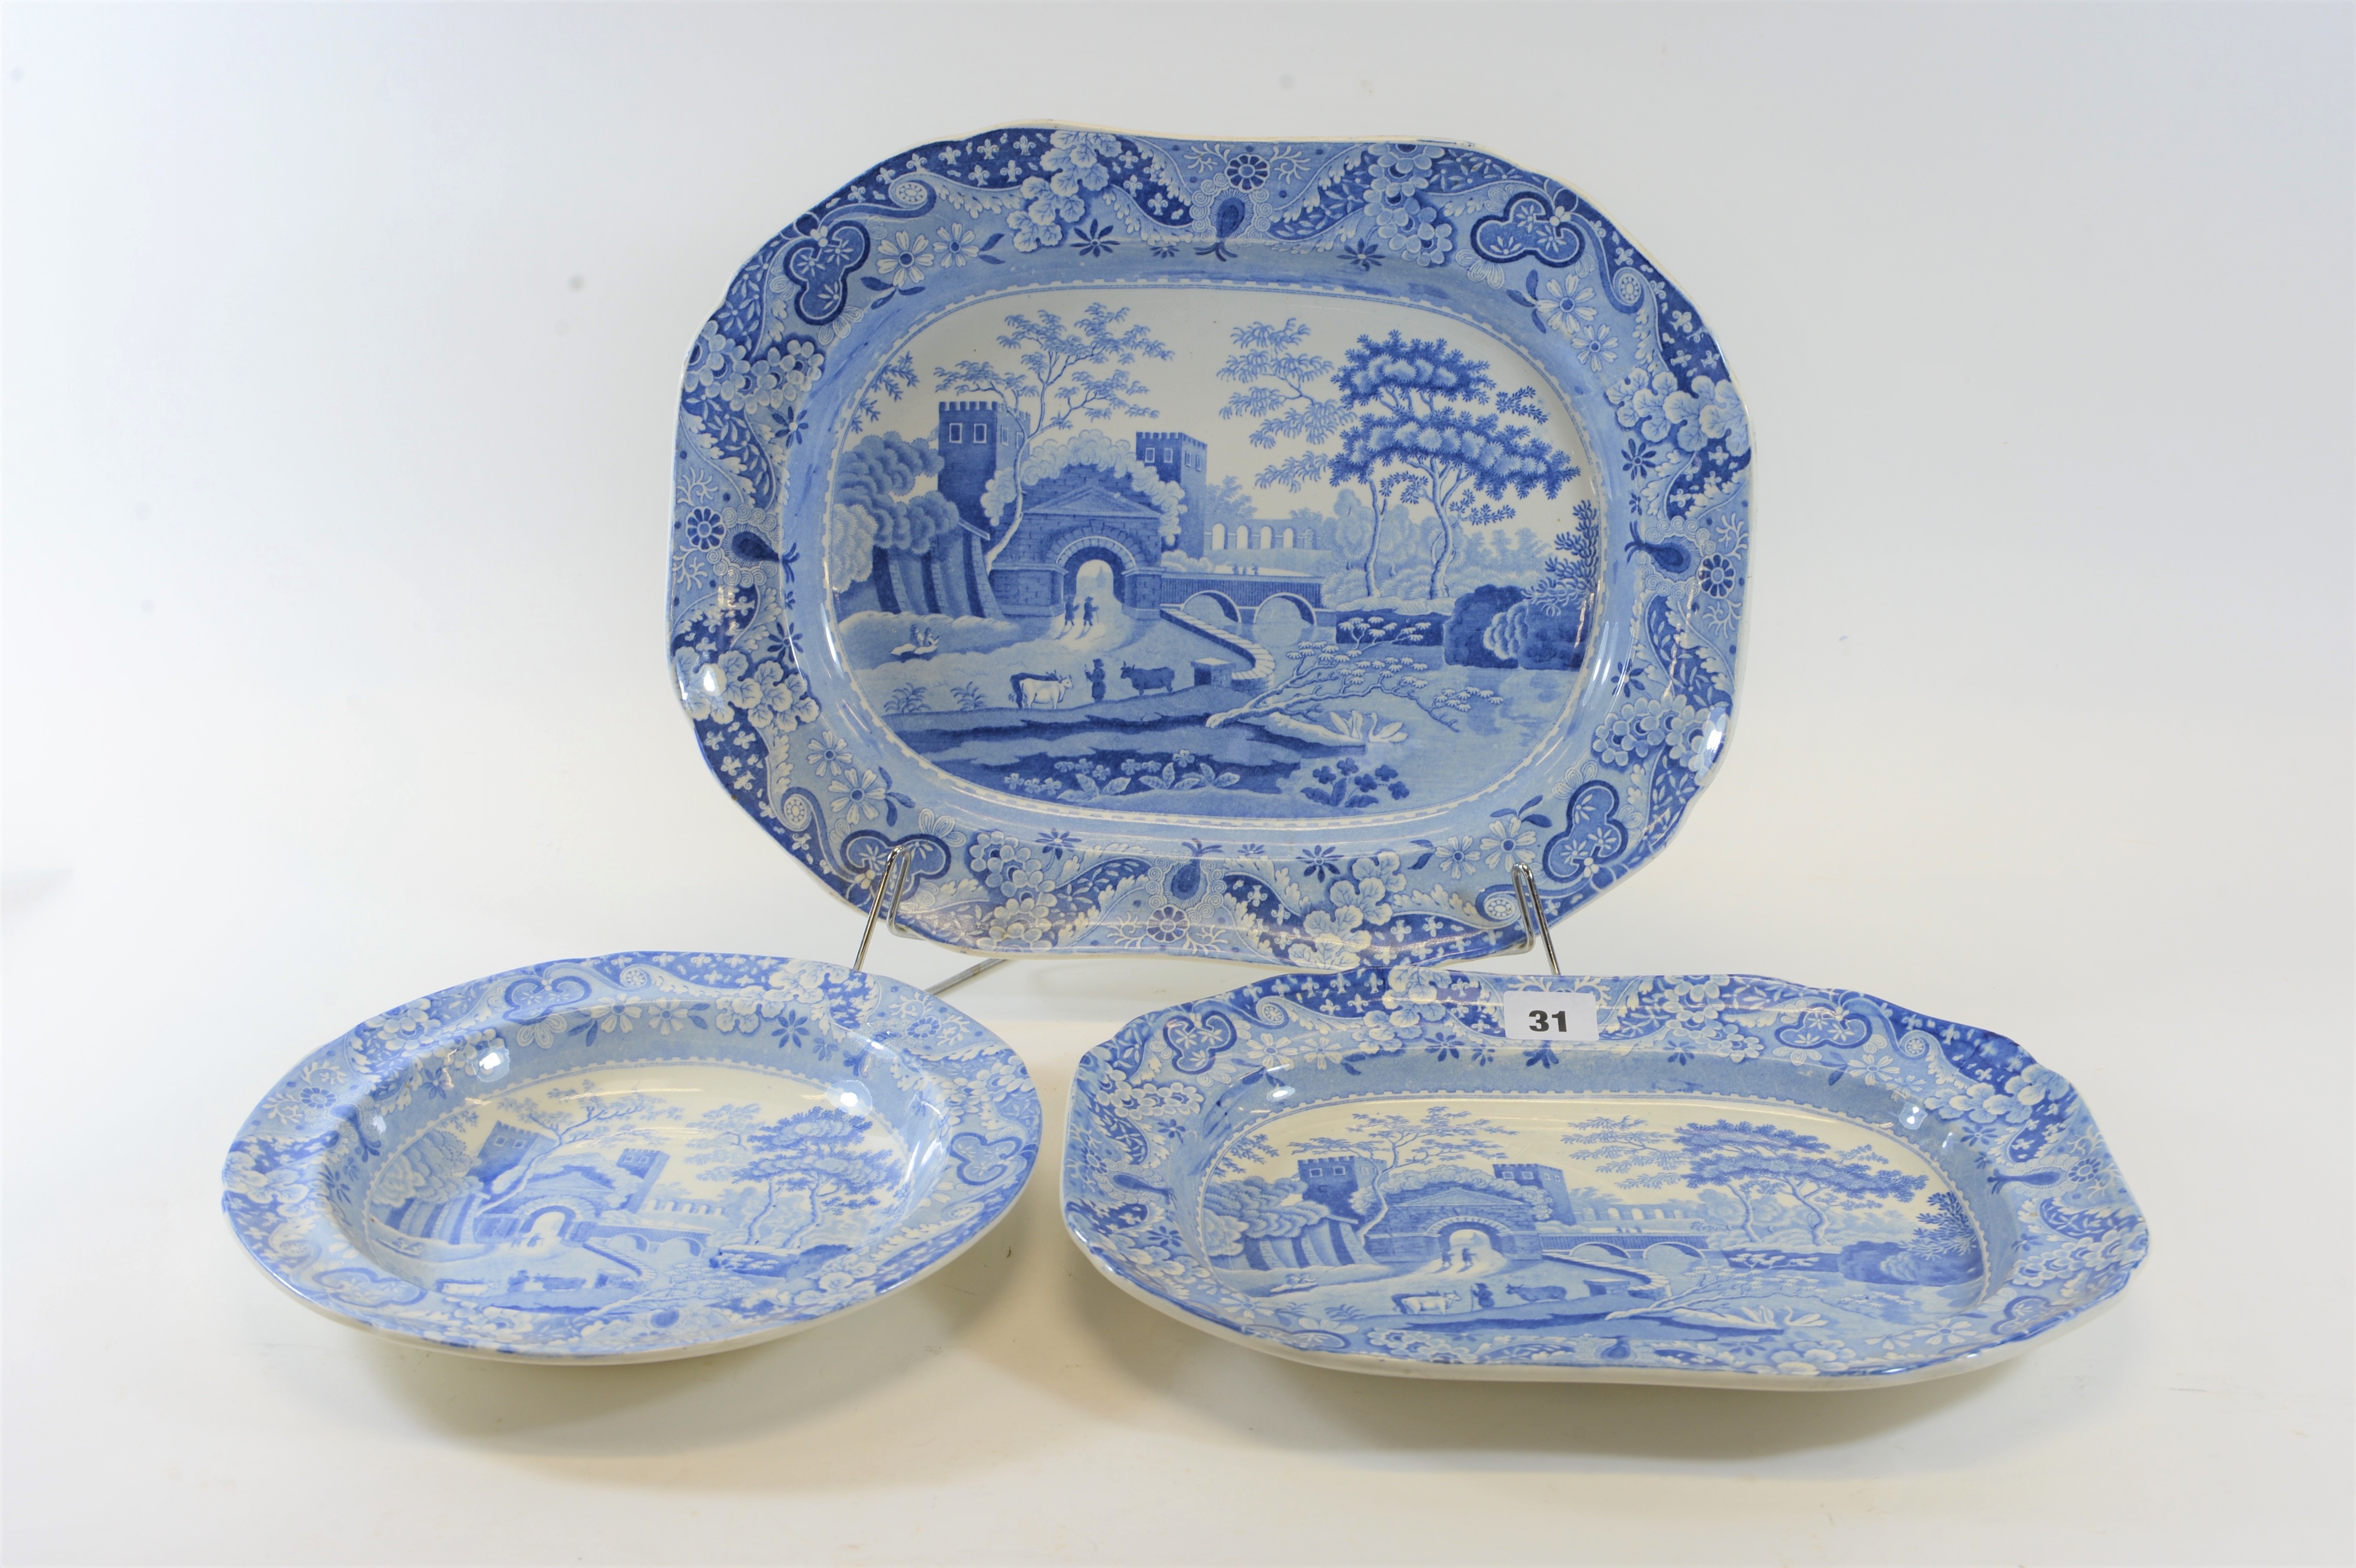 A GRADUATED PAIR OF EARLY 19TH CENTURY COPELAND SPODE "FLOWER" PATTERN TRANSFER DECORATED MEAT